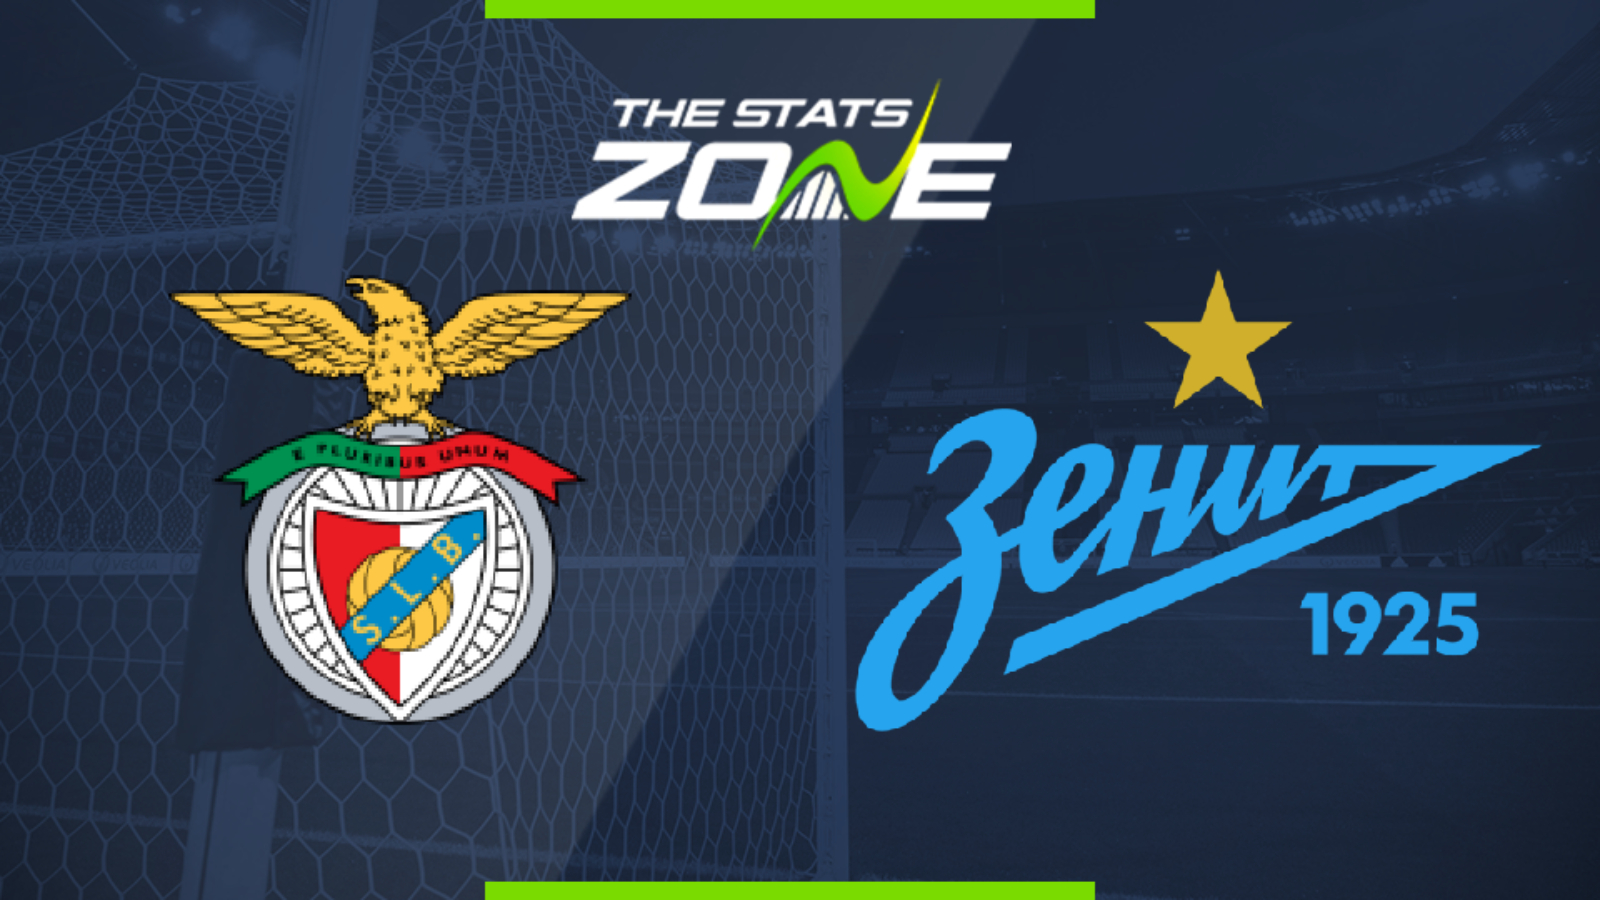 2019-20 UEFA Champions League – Benfica vs Zenit Preview & Prediction - The Stats Zone1600 x 900